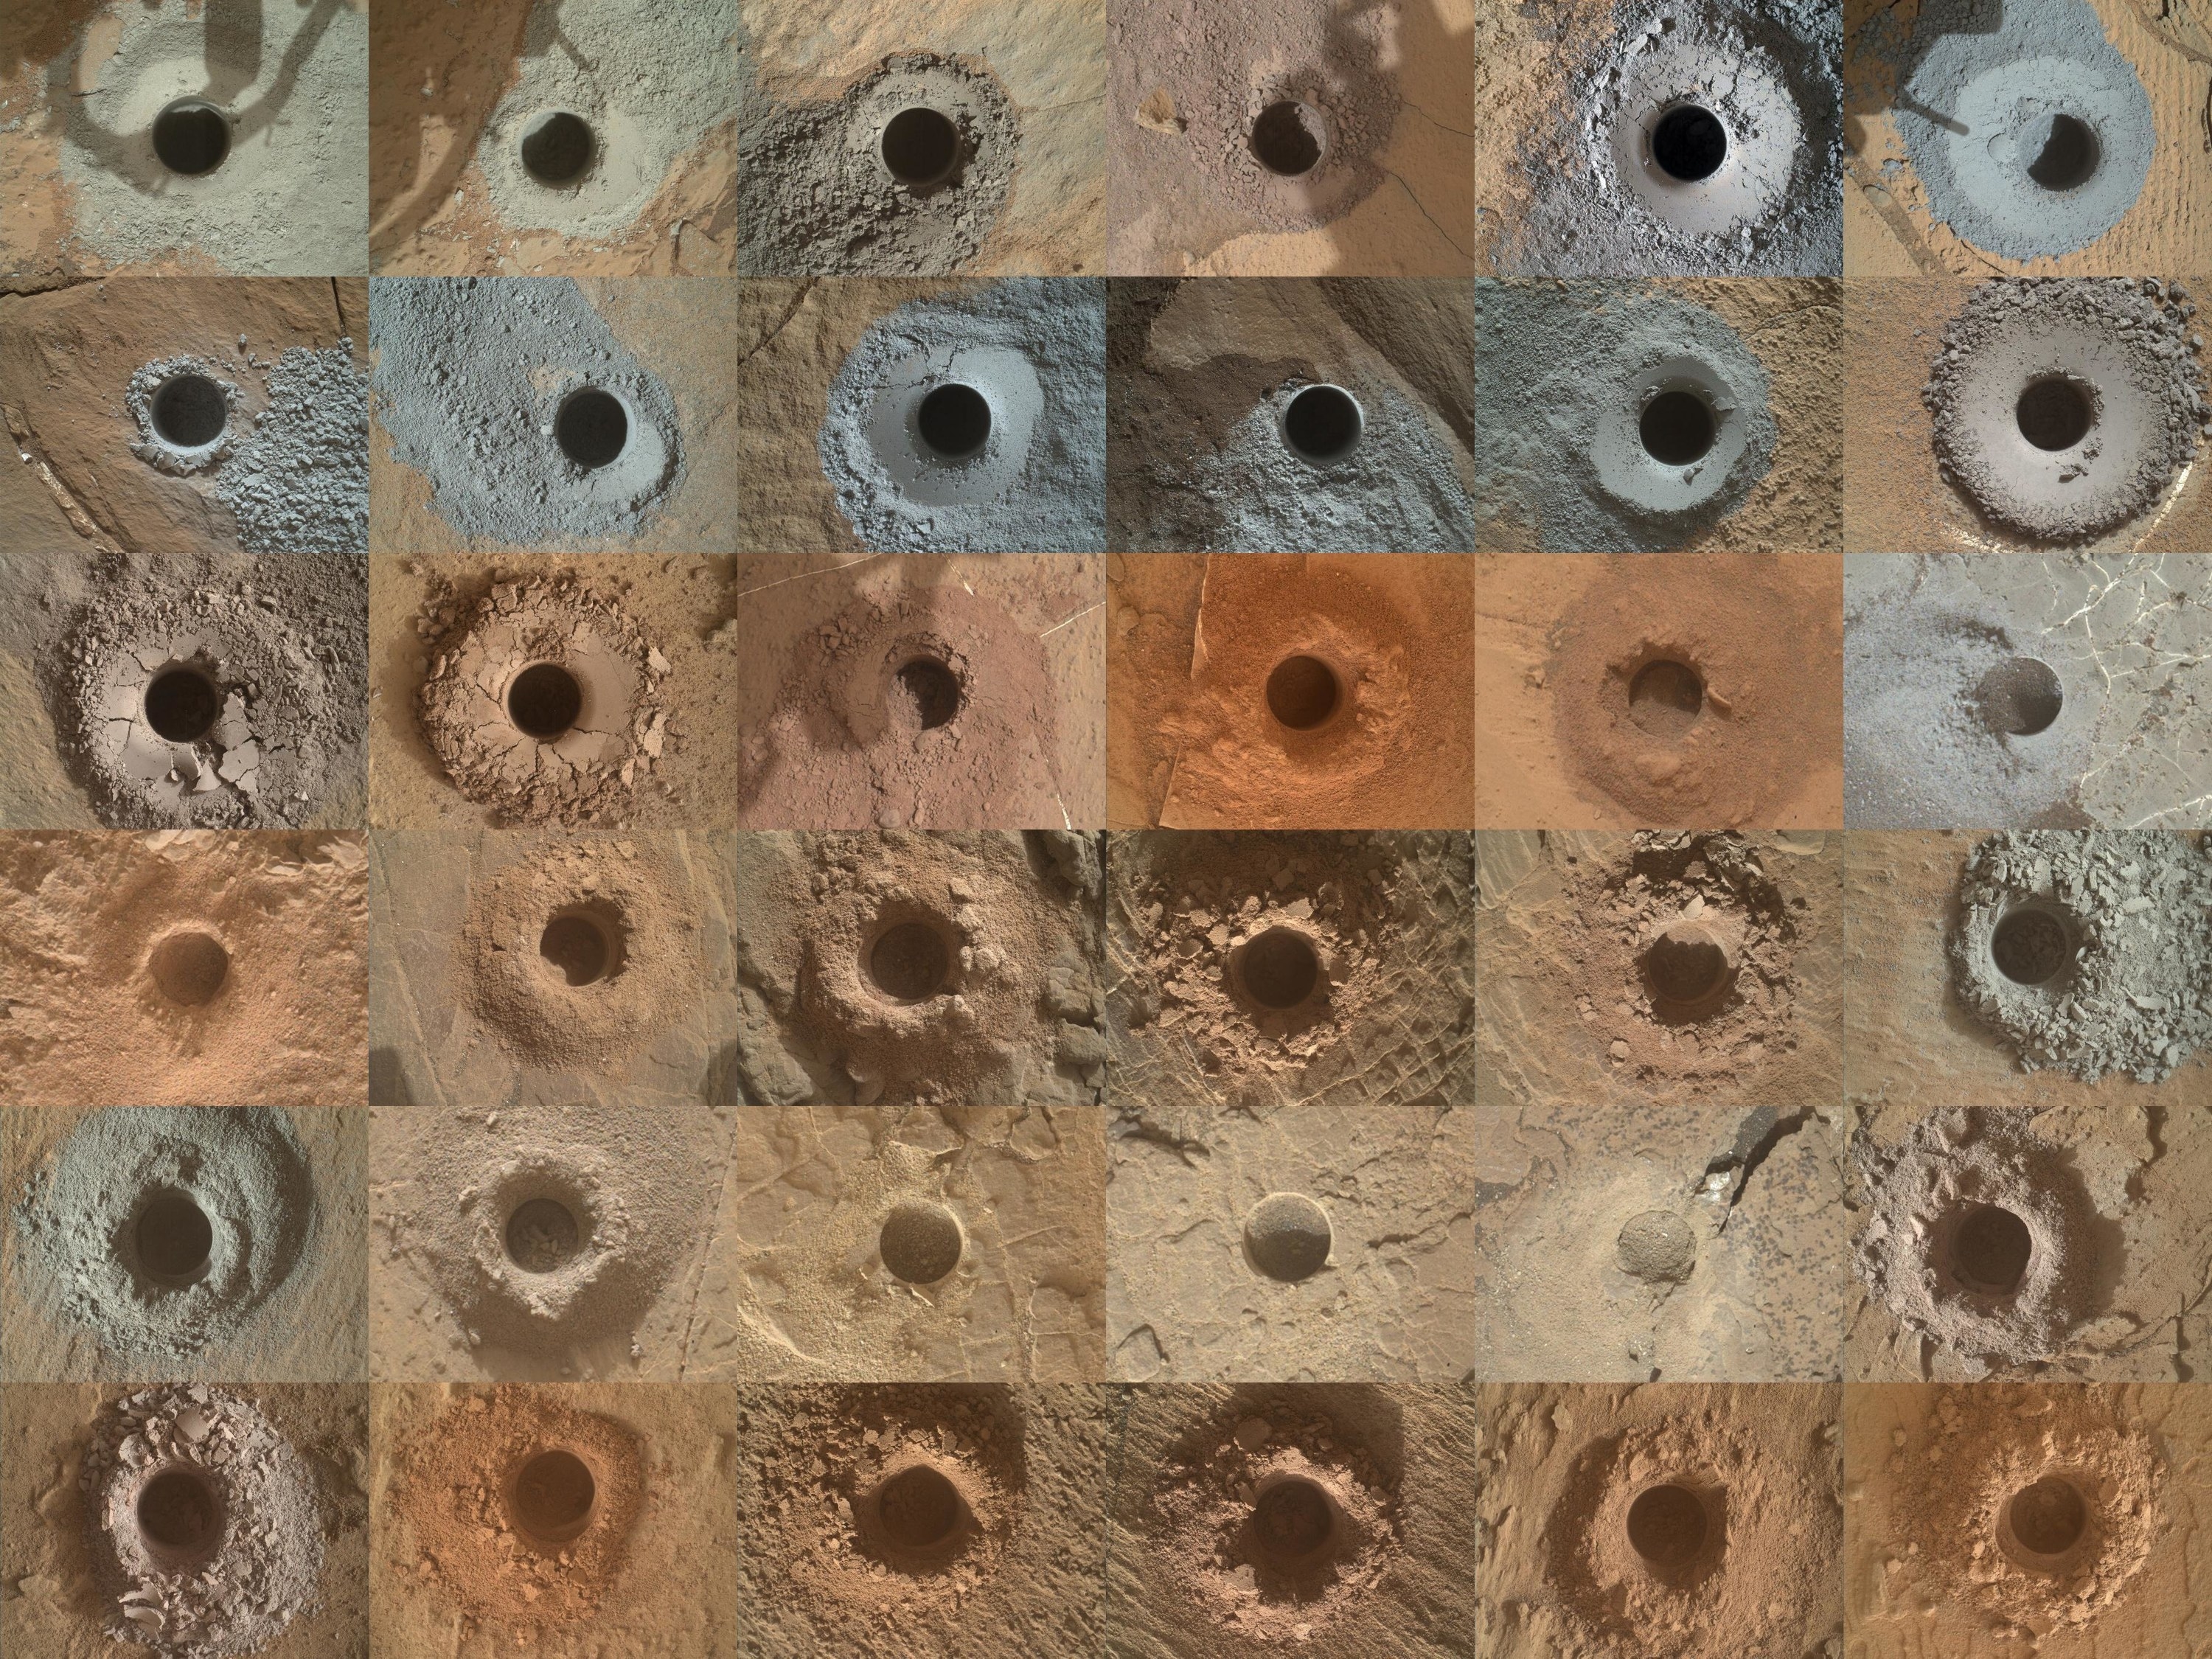 Six rows of holes in a claylike surface of various colors